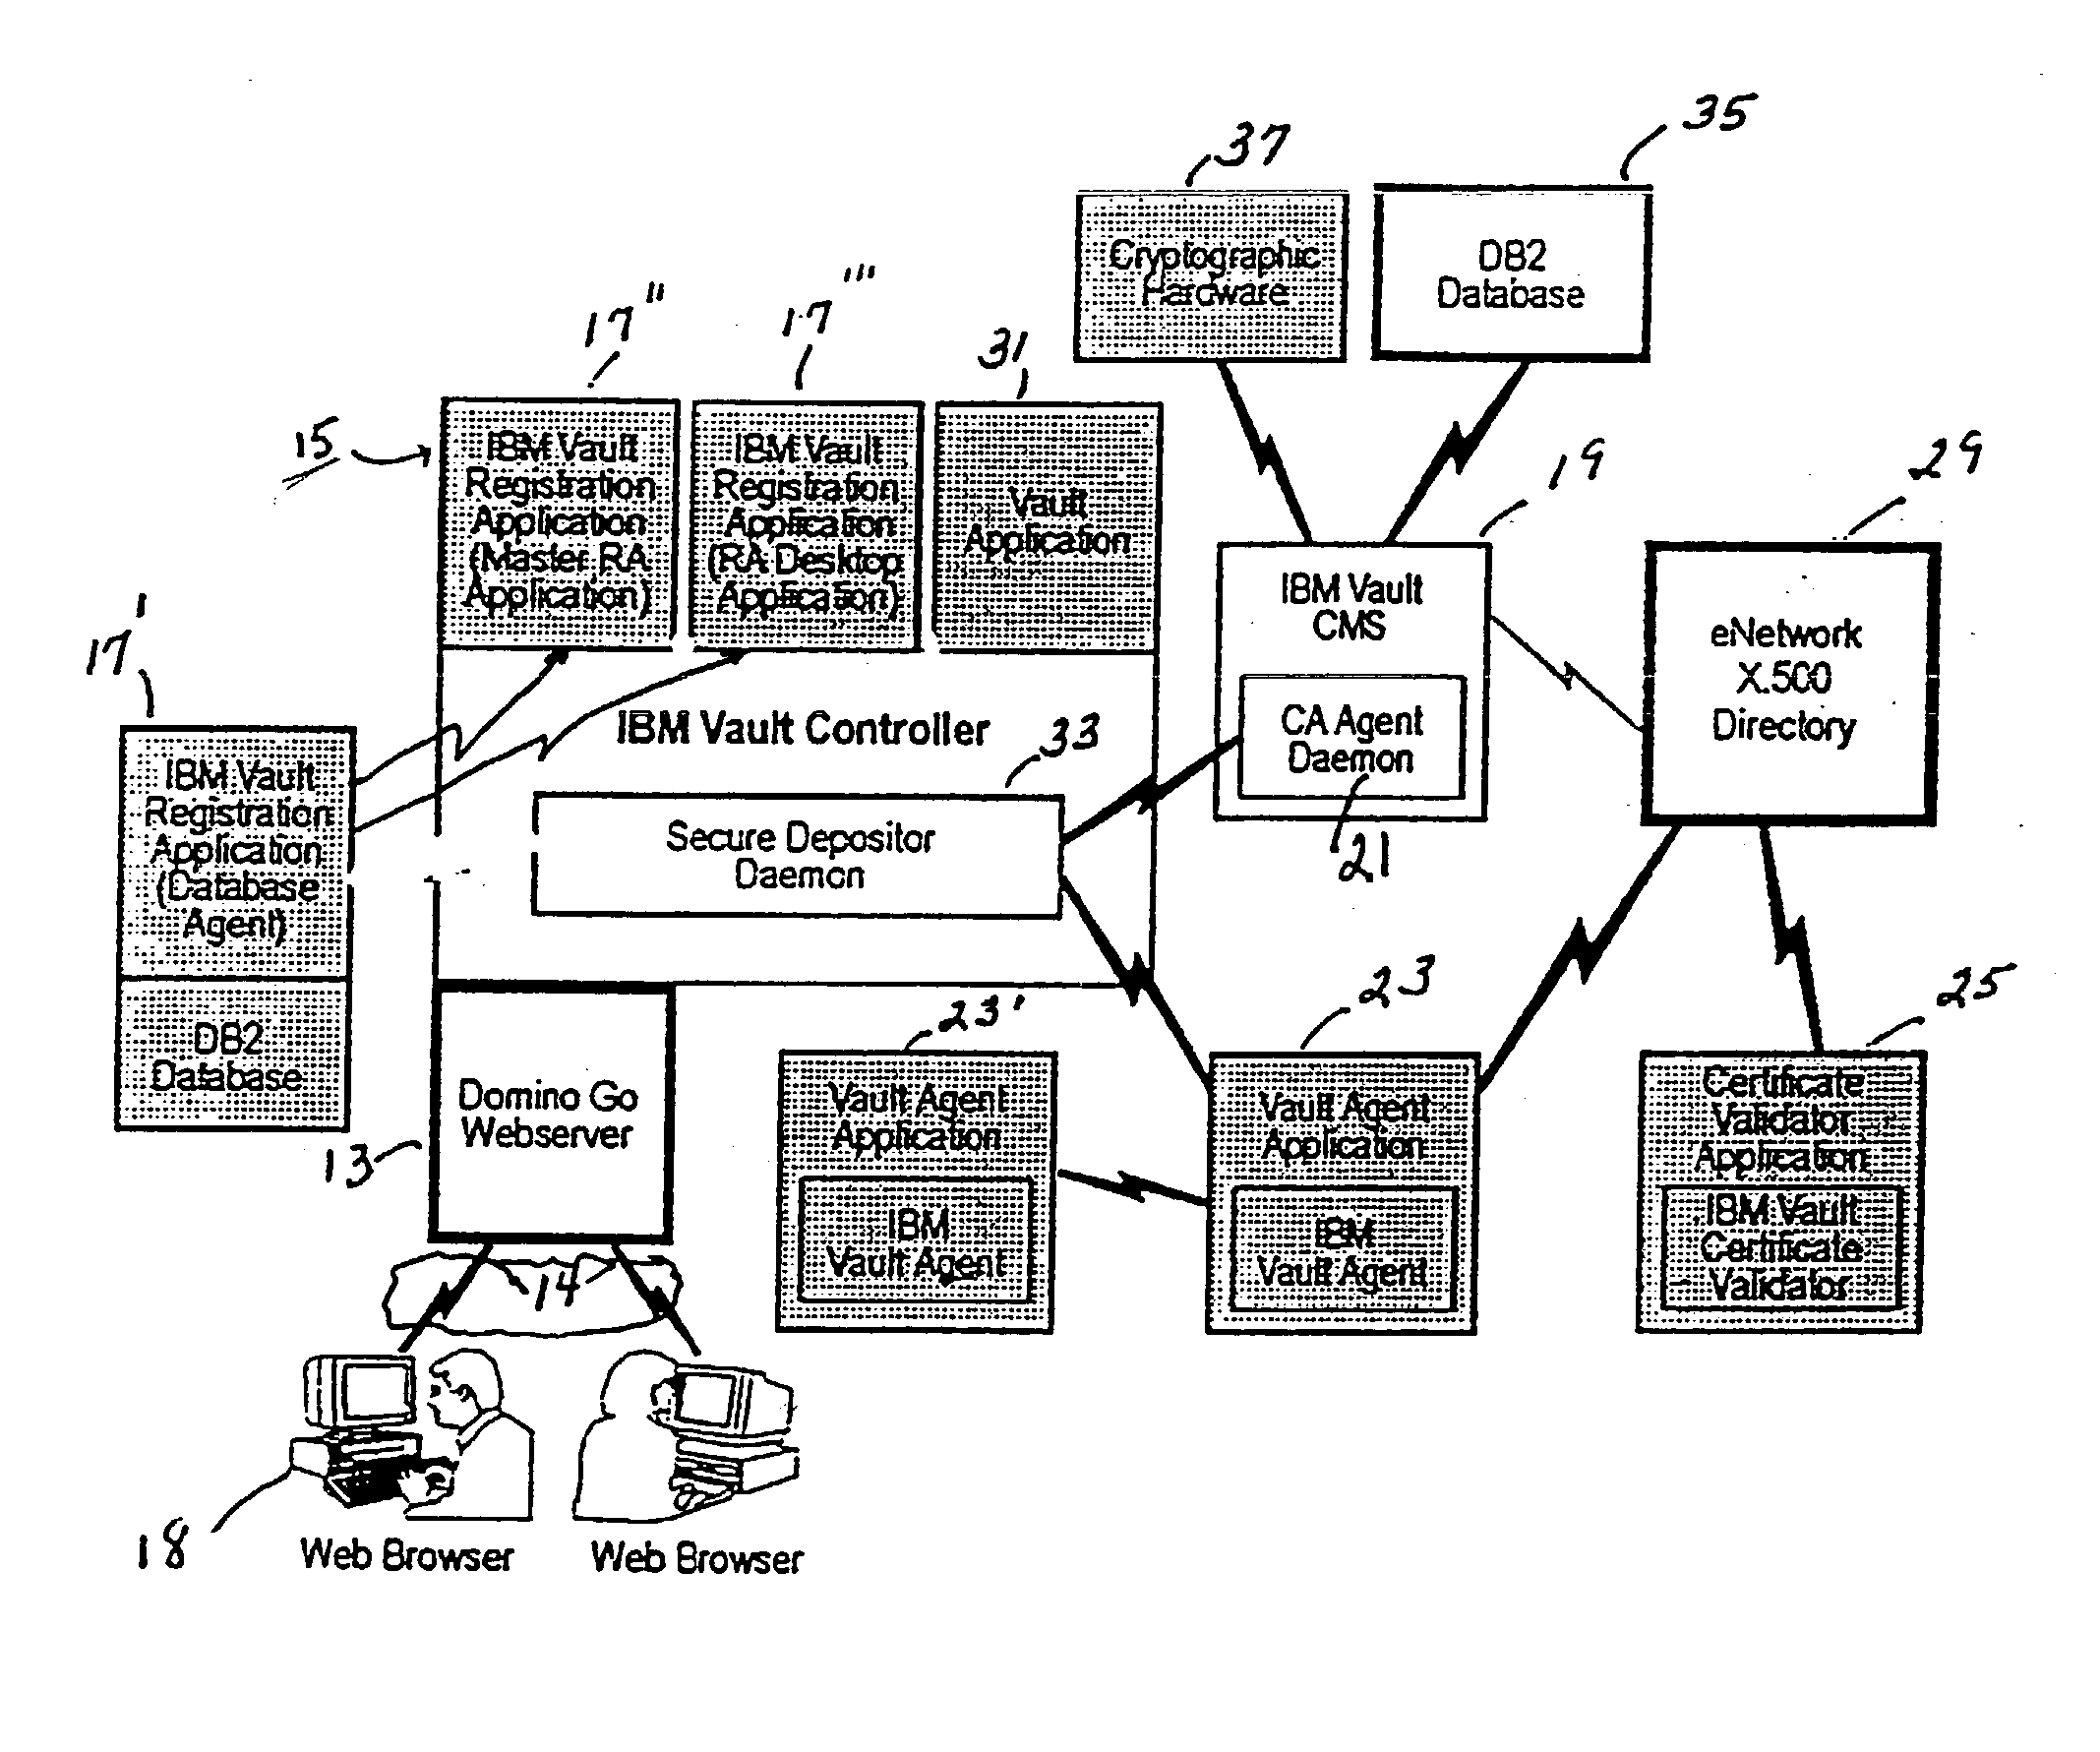 Secure communication system and method of operation for conducting electronic commerce using remote vault agents interacting with a vault controller